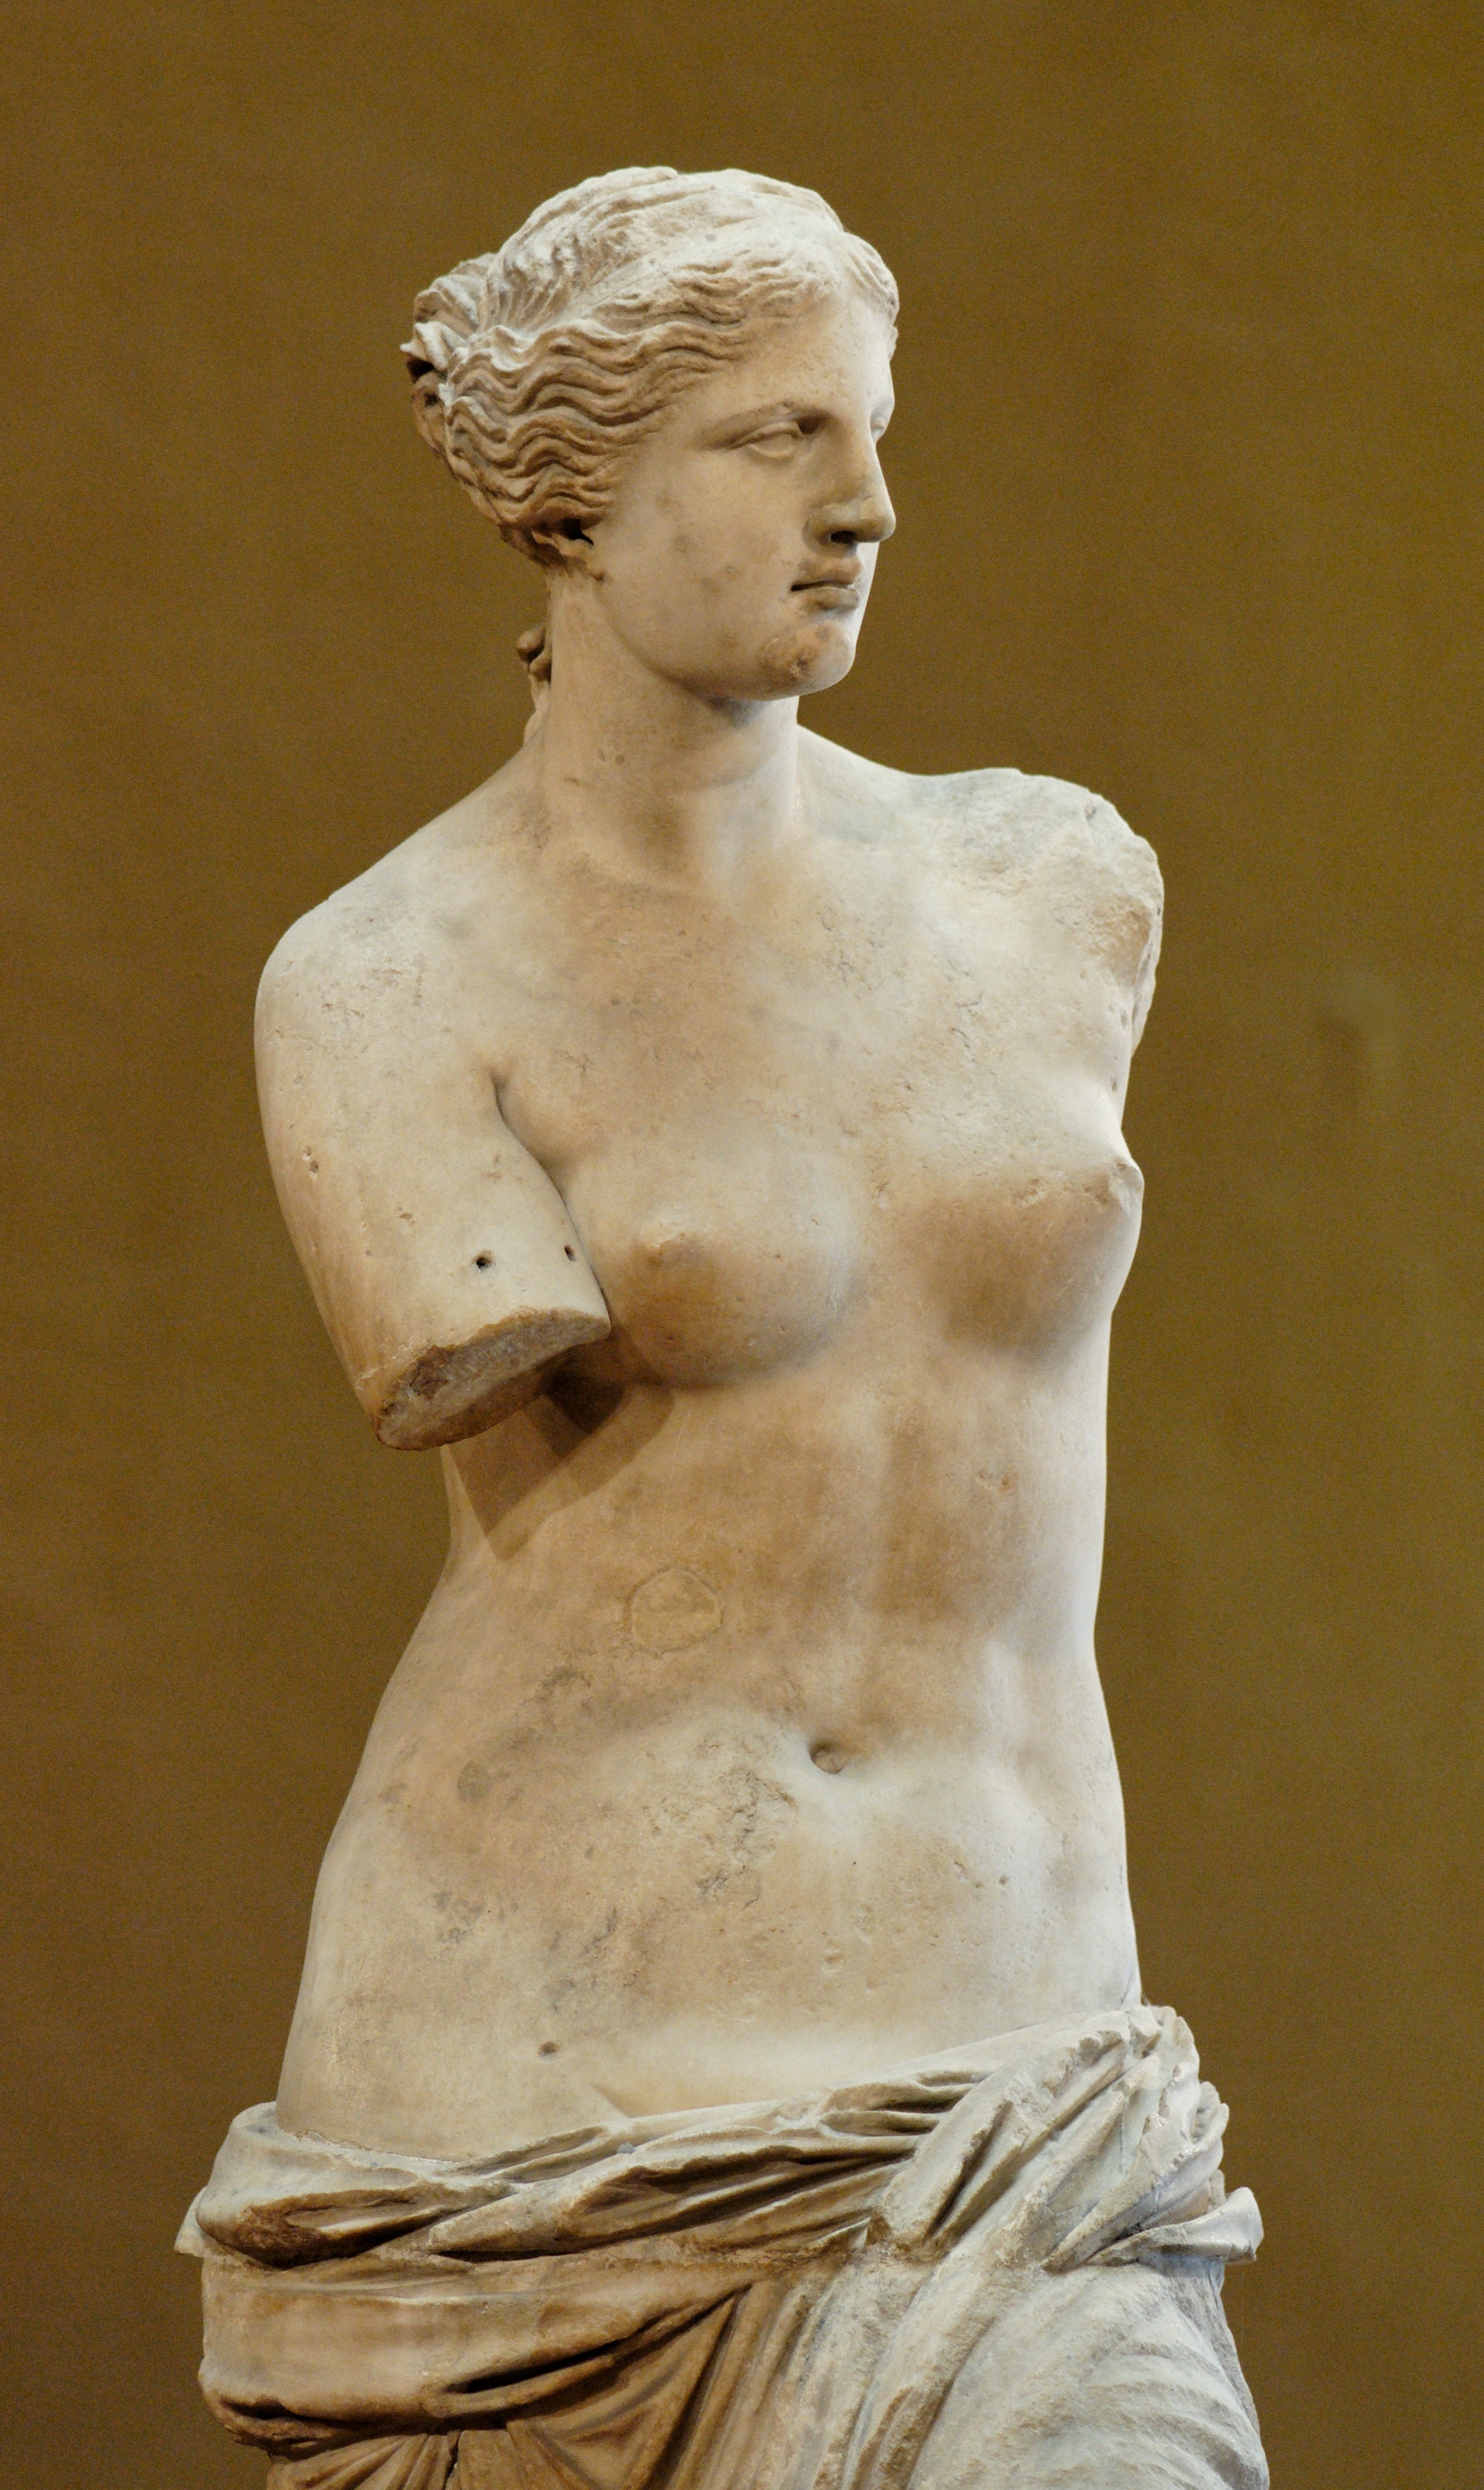 Aphrodite, Amphitrite -Goddess of the Sea, (Aphrodite of Milos or better known as the Venus de Milo, for Melos of the Cyclades Islands where was found in 1820), thought to be the work of Alexandros of Antioch, c. 120-100 BCE, Parian Marble, 202 cm, Louvre Museum.